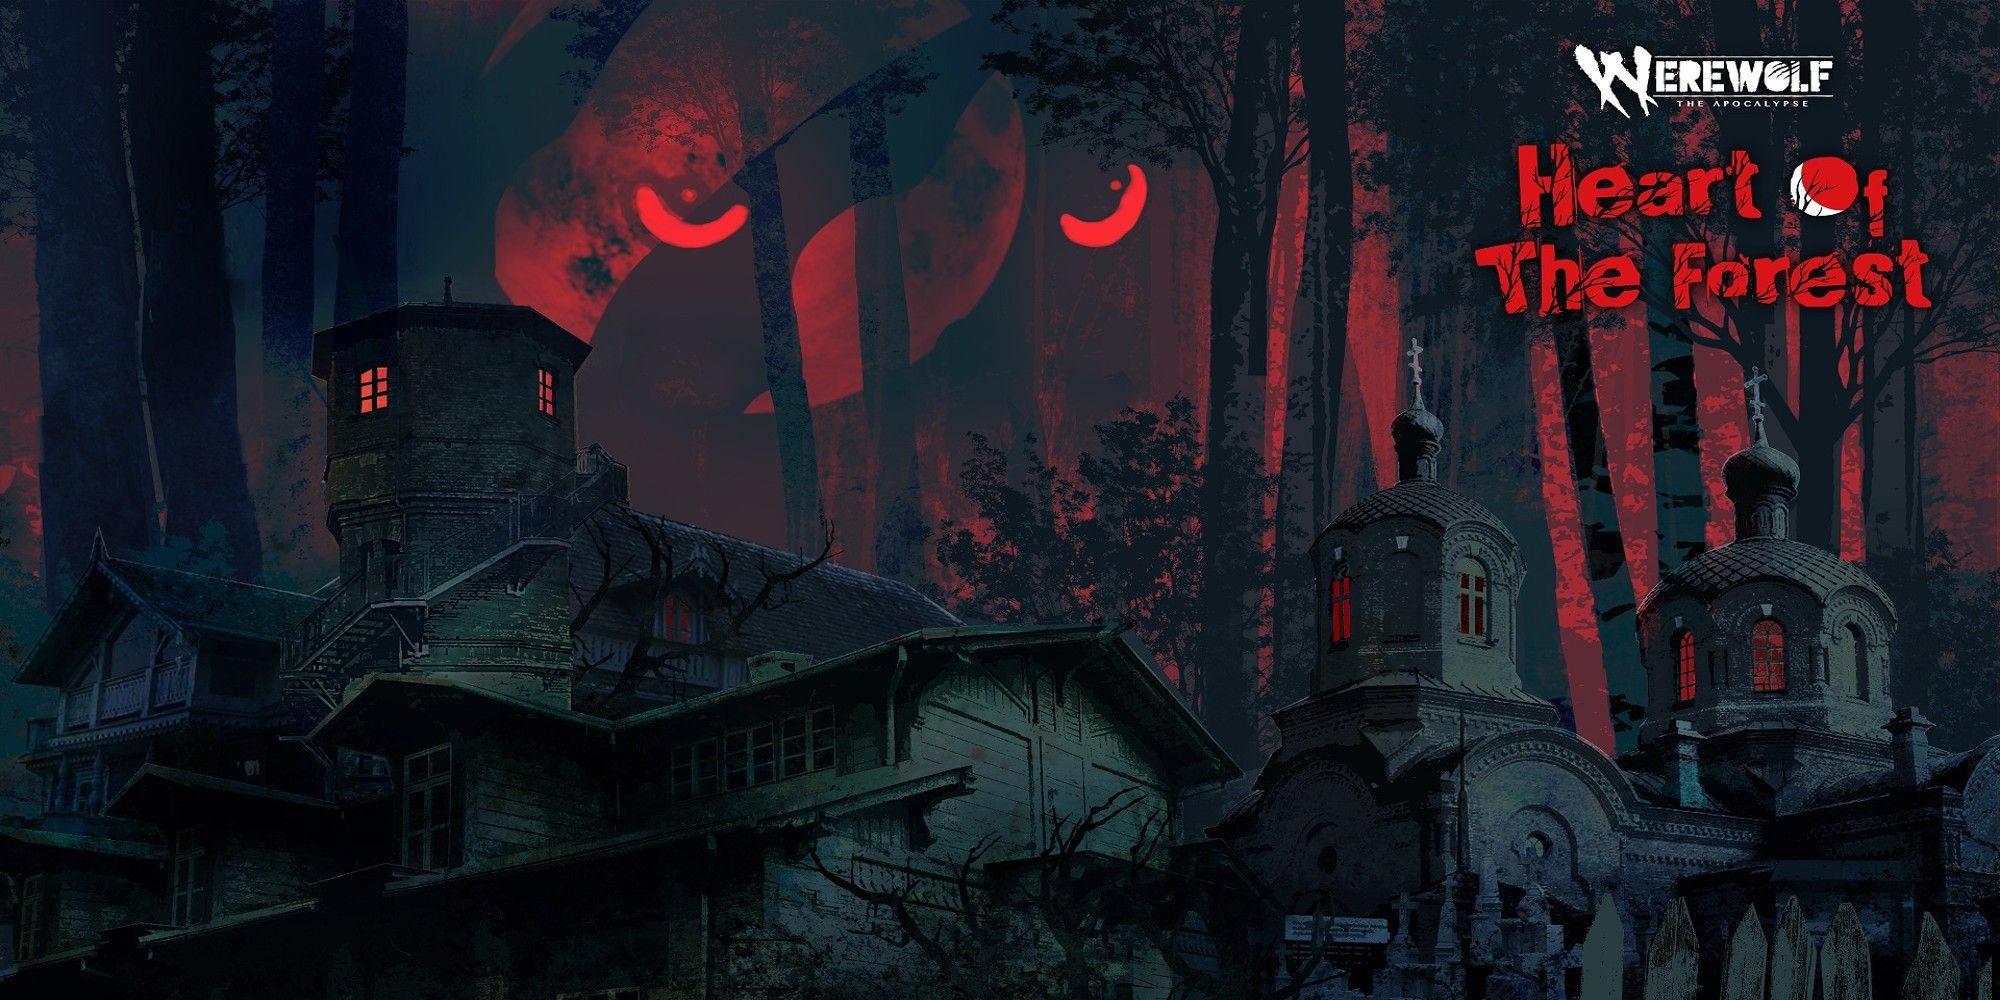 A picture of a forest with a pair of red eyes looming overhead a house